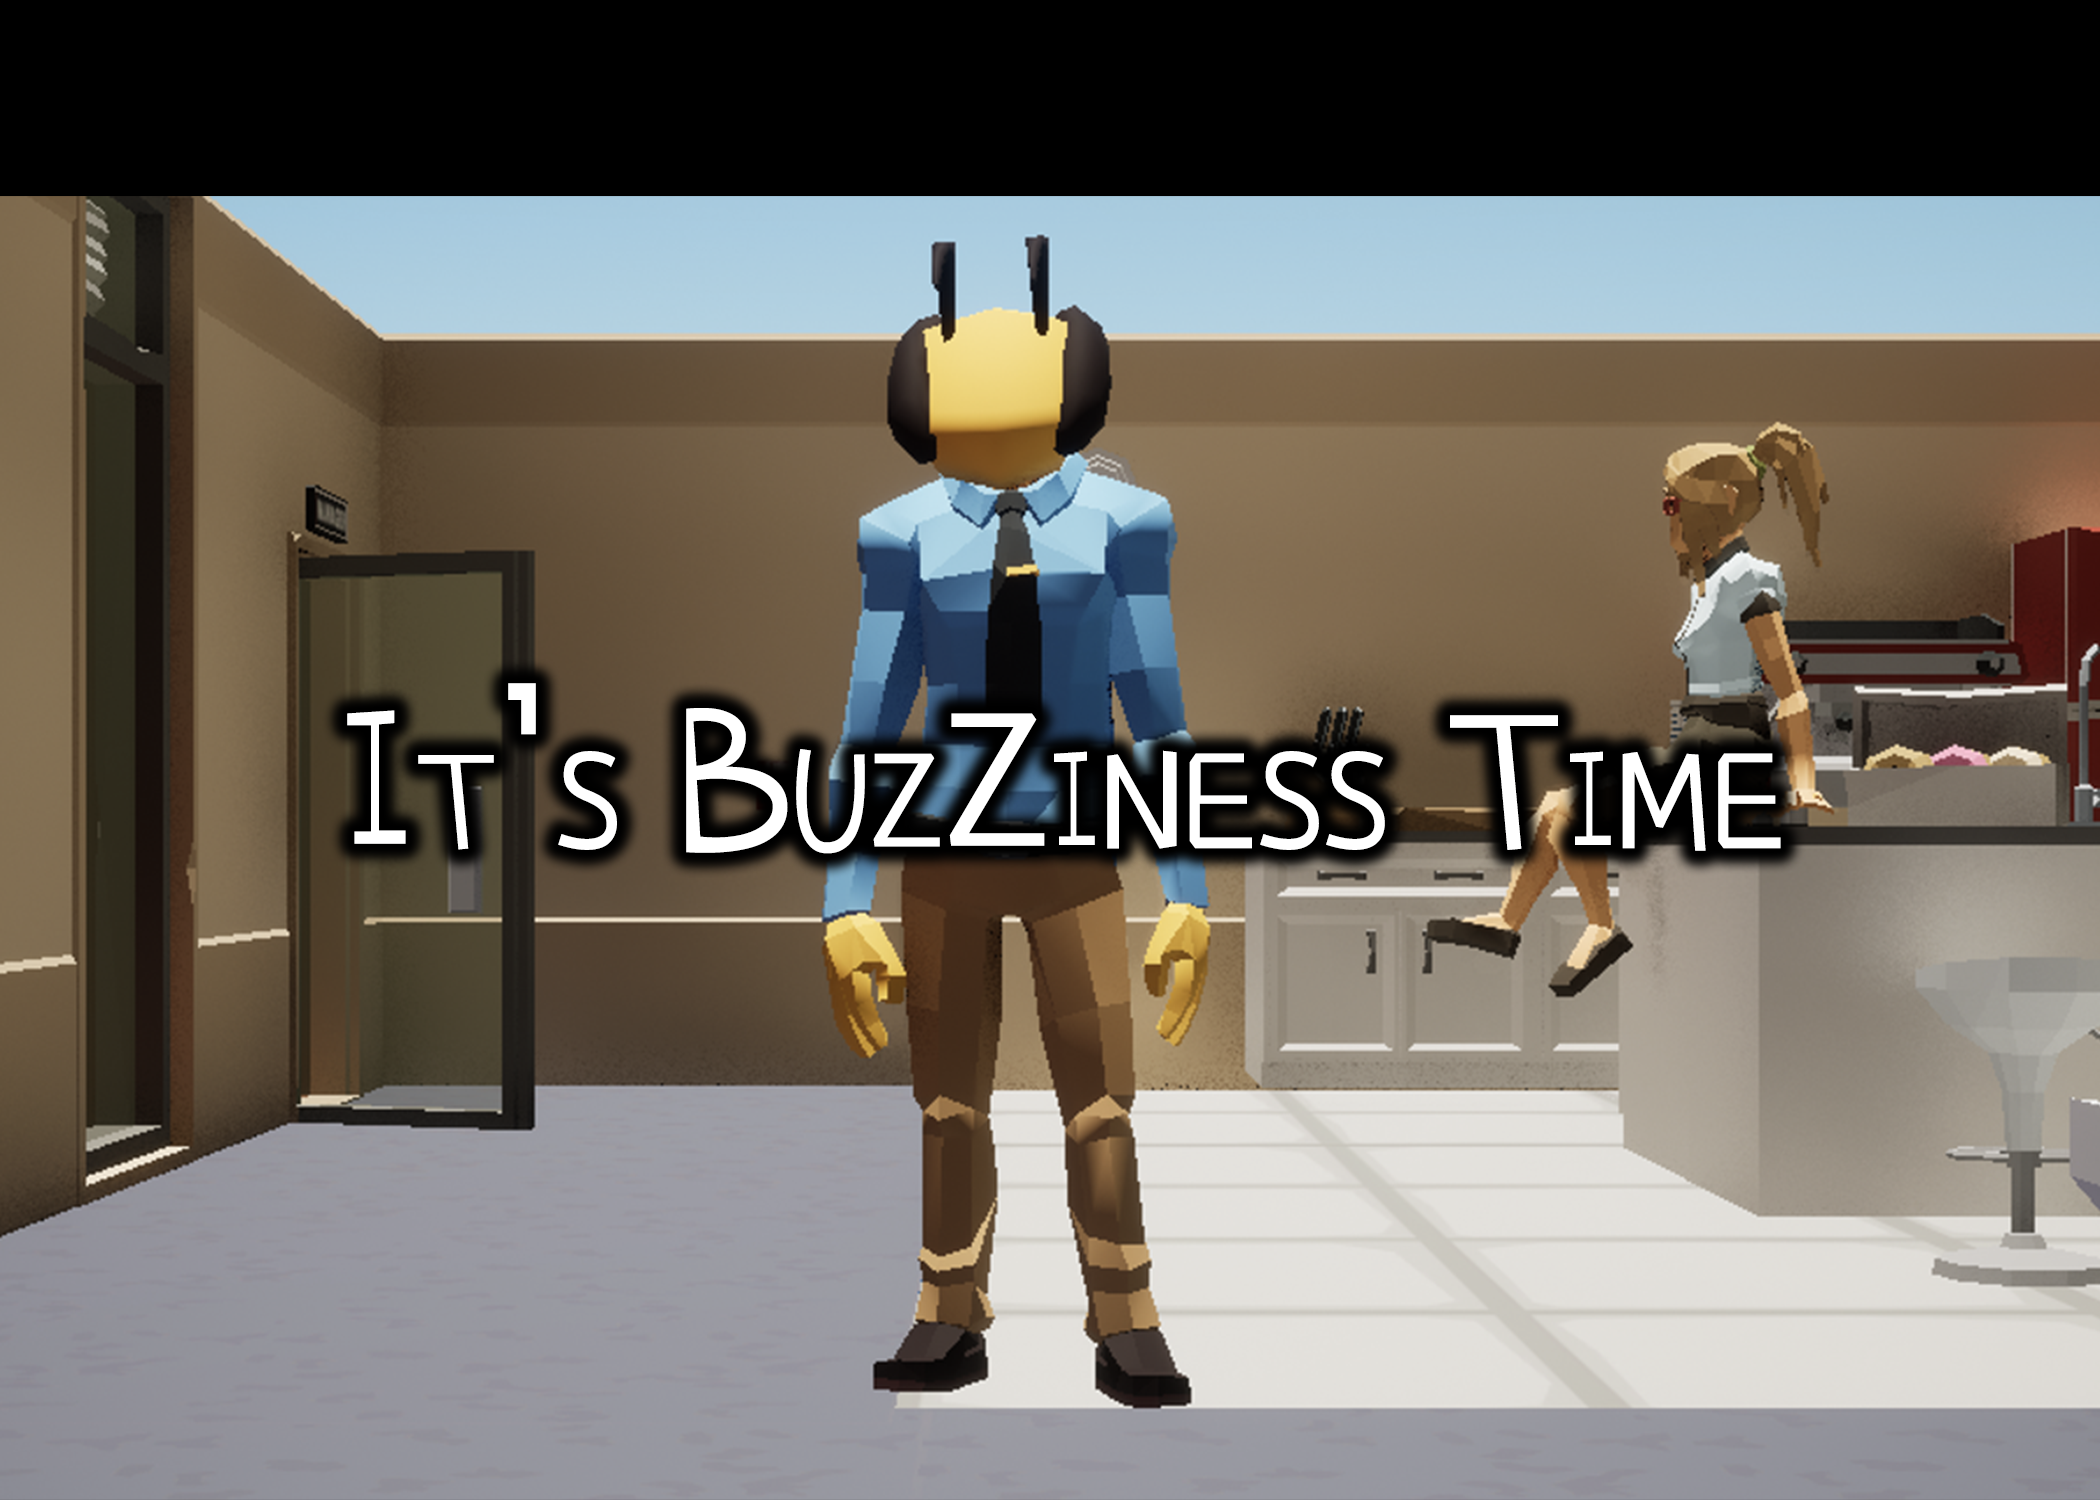 It's Buzziness Time